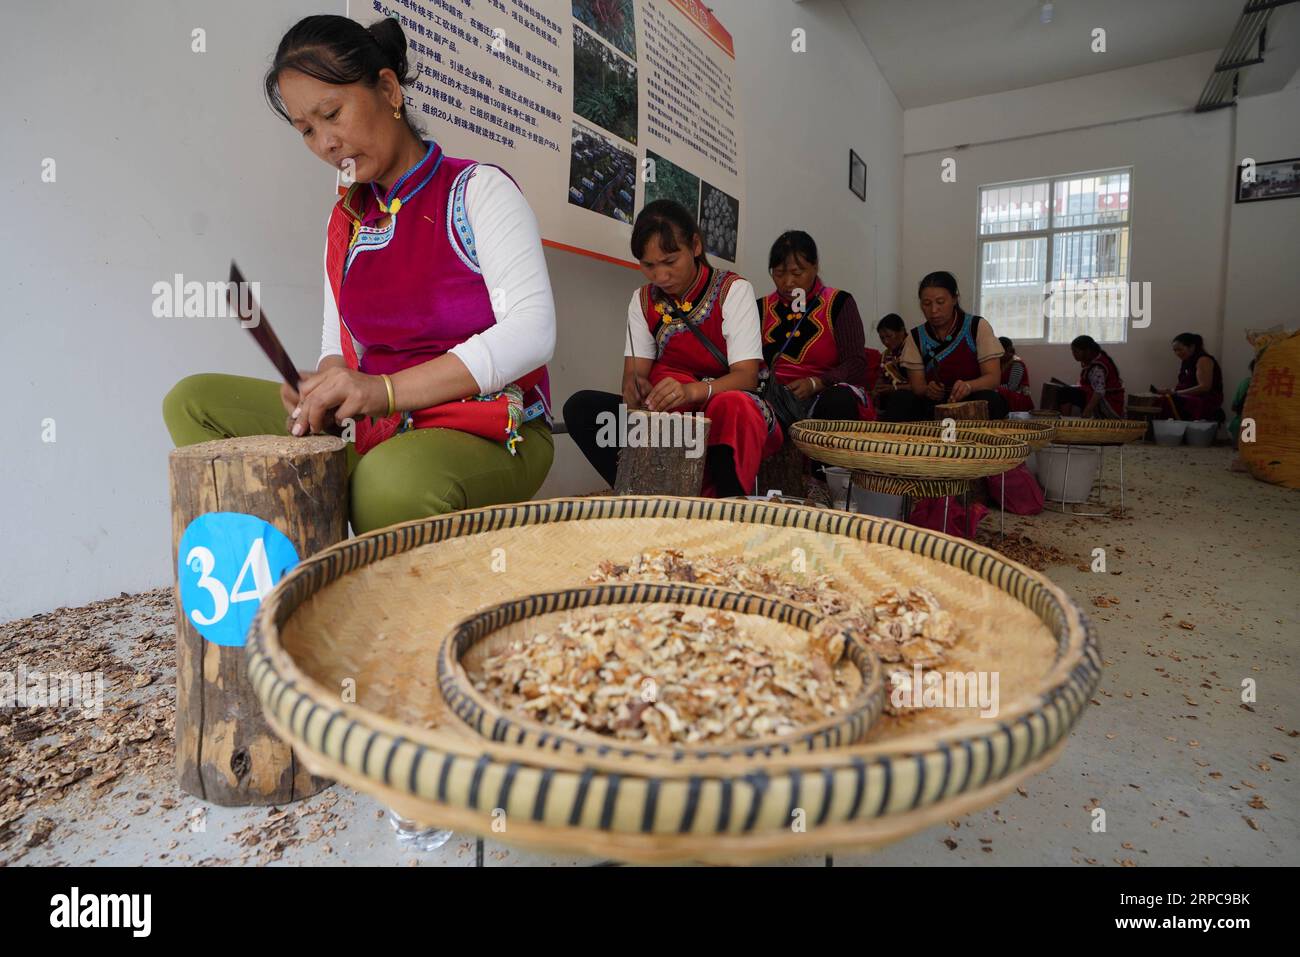 (190628) -- KUNMING, June 28, 2019 -- People of Lisu ethnic group peel walnuts at a workshop of a resettlement site in Daxingdi Town, Lisu Autonomous Prefecture of Nujiang, southwest China s Yunnan Province, June 24, 2019. Lisu people have been relocated to a new community from unlivable mountain areas thanks to the poverty alleviation policy by local government. Zhiguo minorities are special members of China s 56 ethnic groups. The term Zhiguo refers to minority groups who, before modernization, had lived in relative isolation and skipped the transition period associated with feudal monarchy. Stock Photo